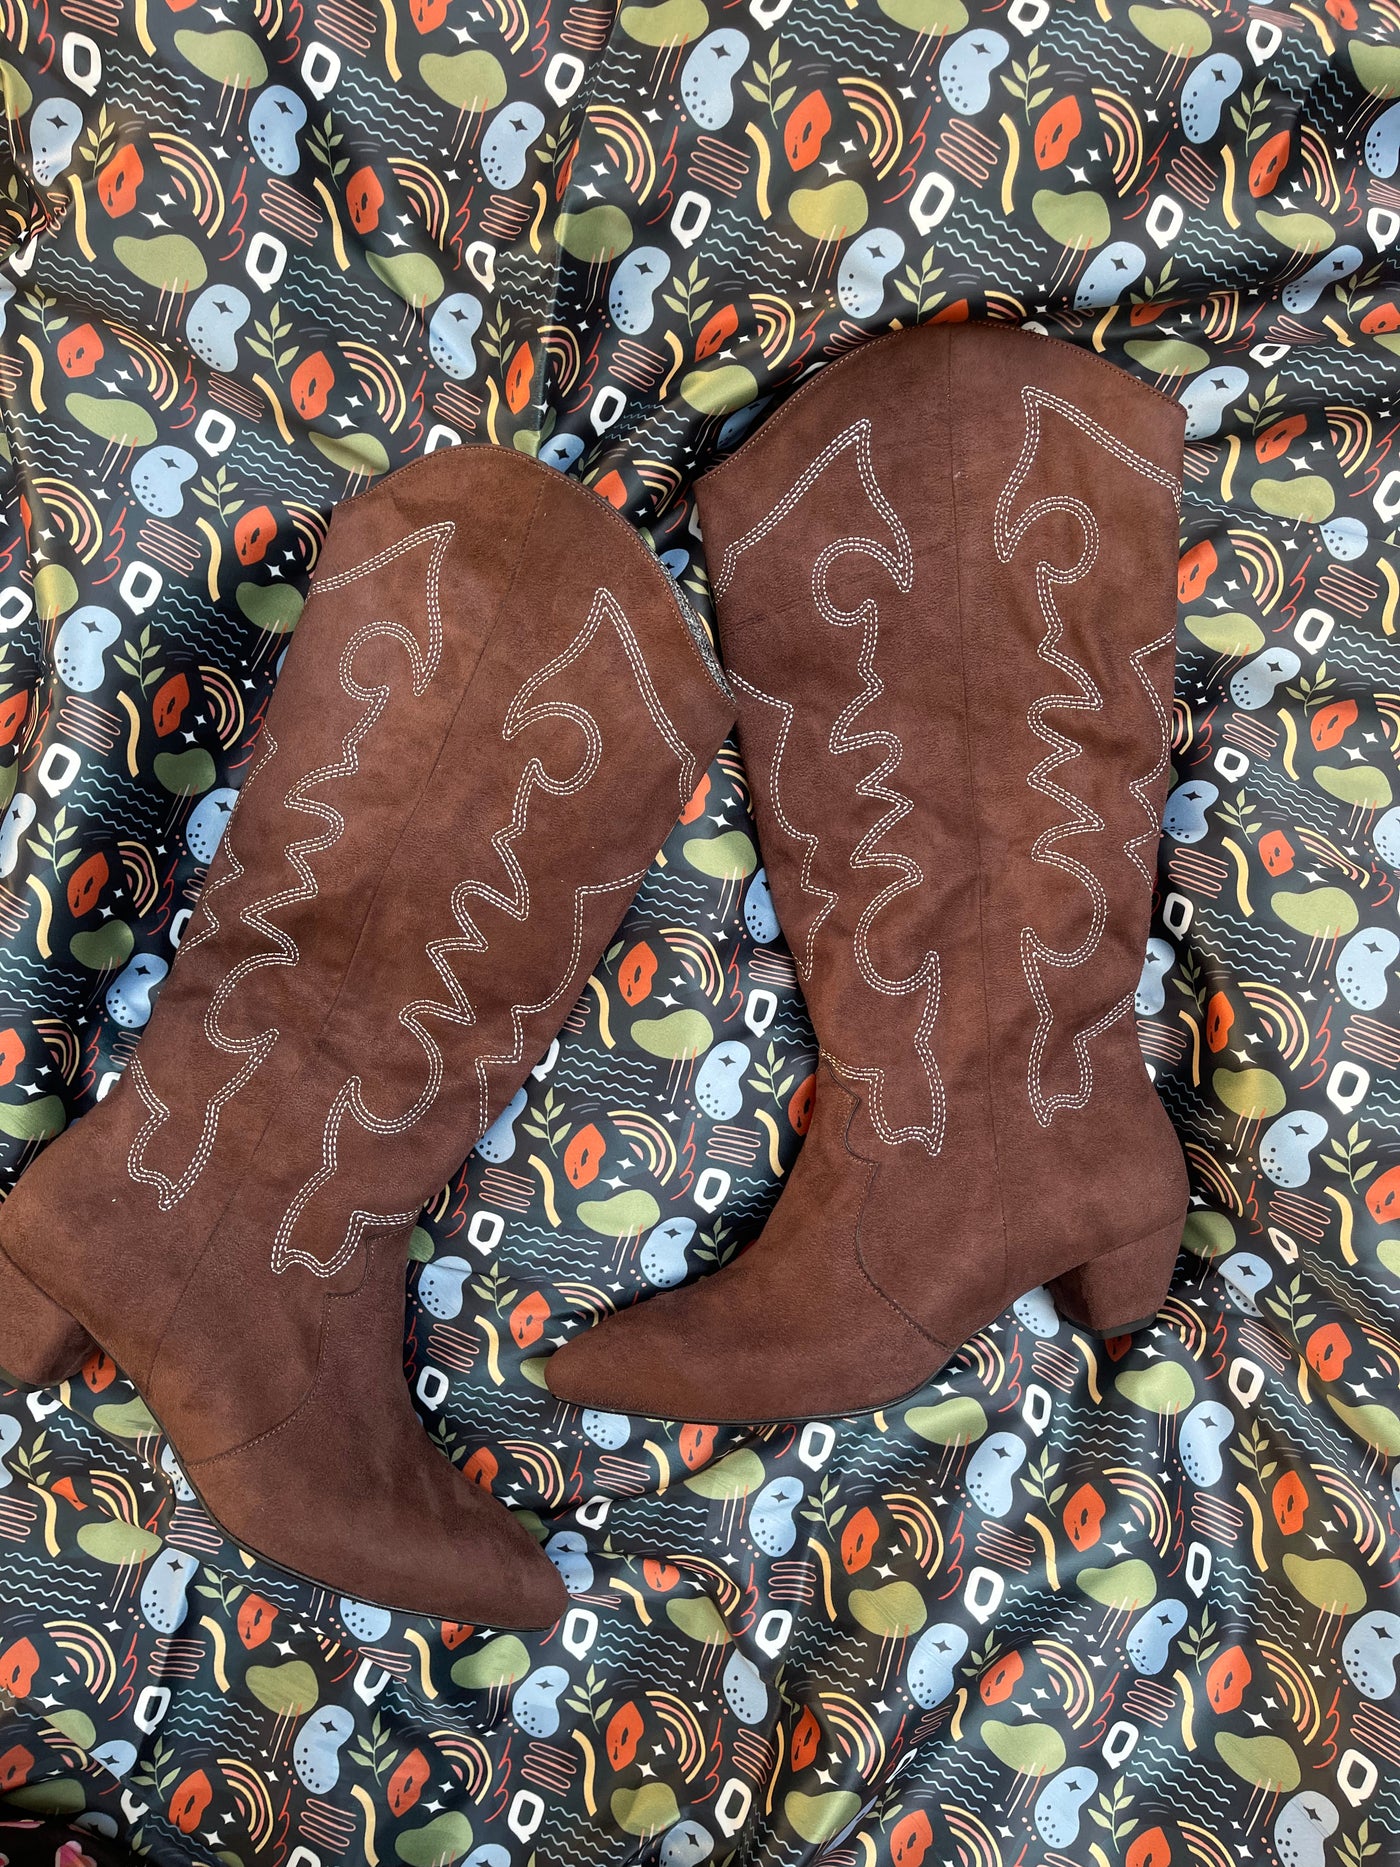 Detalles Suede Cowgirl Boots - BROWN